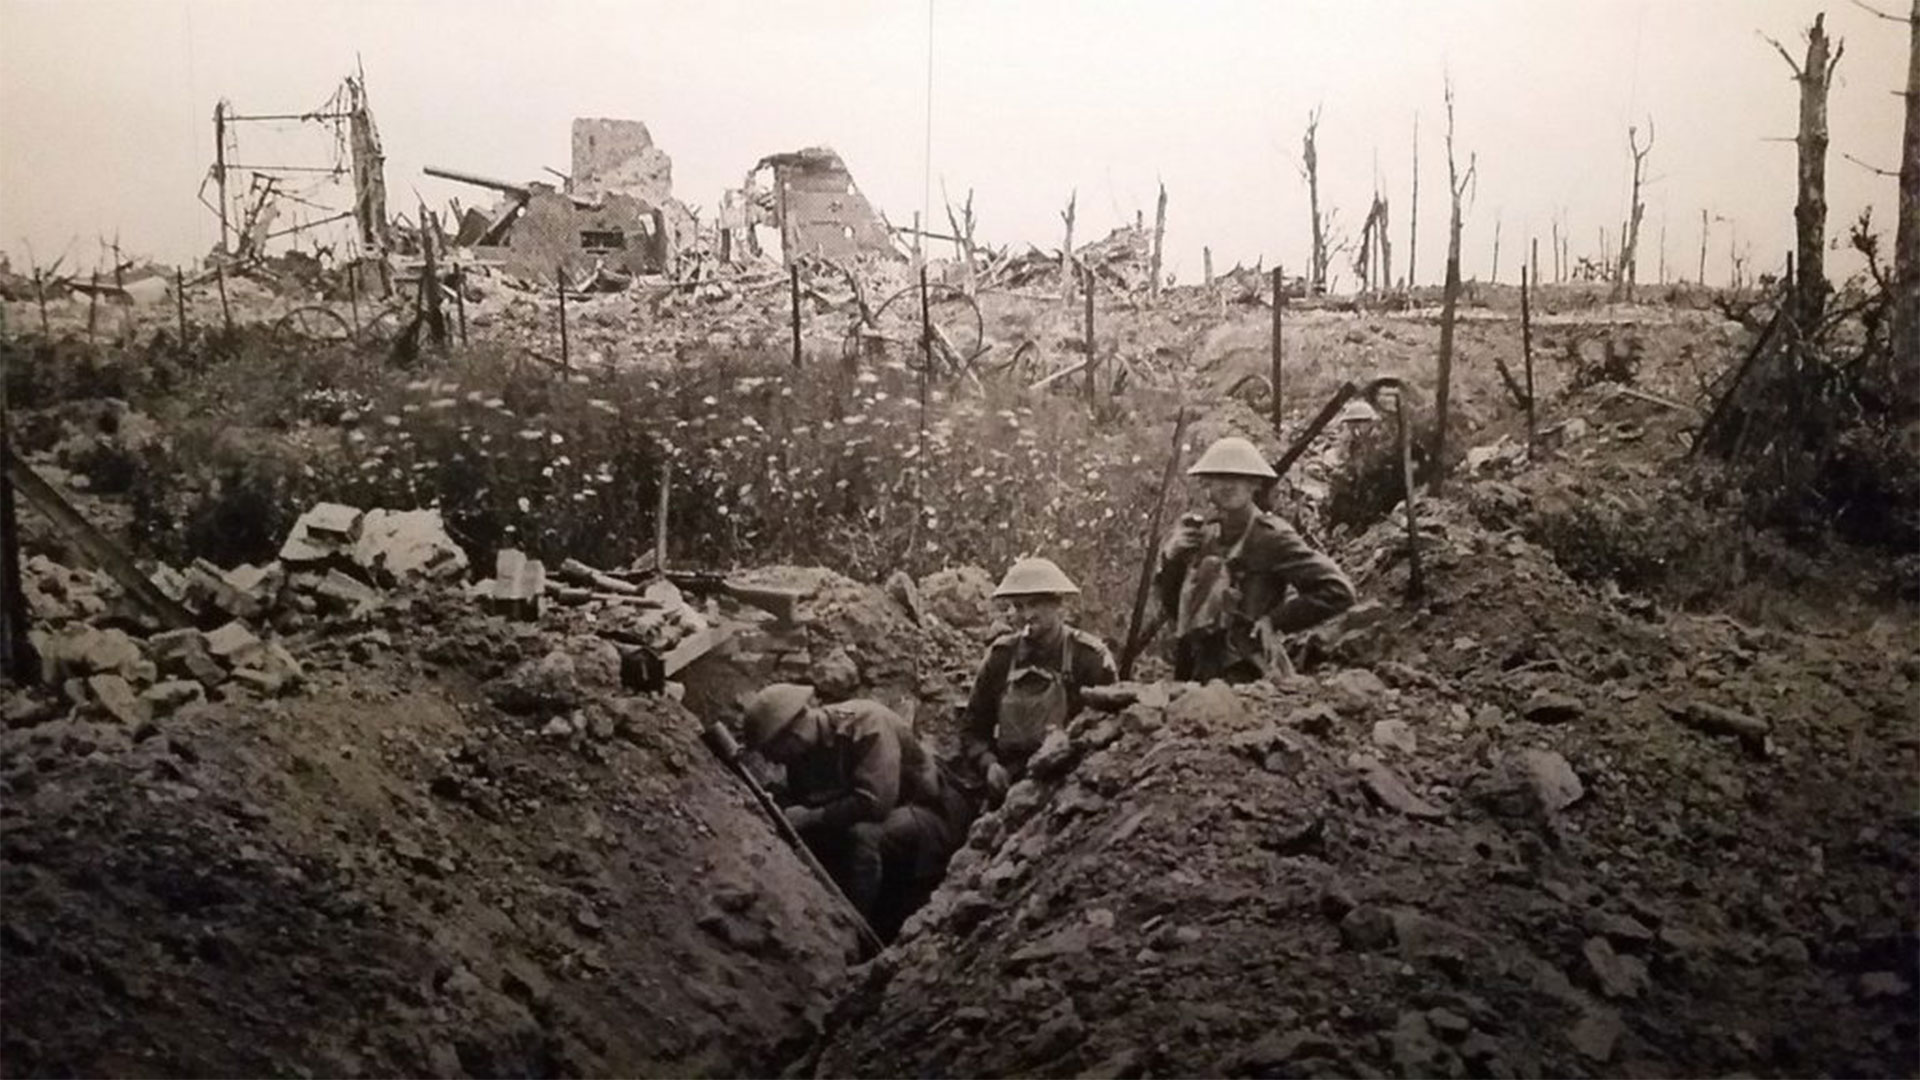 A black and white image showing the trenches of World War one